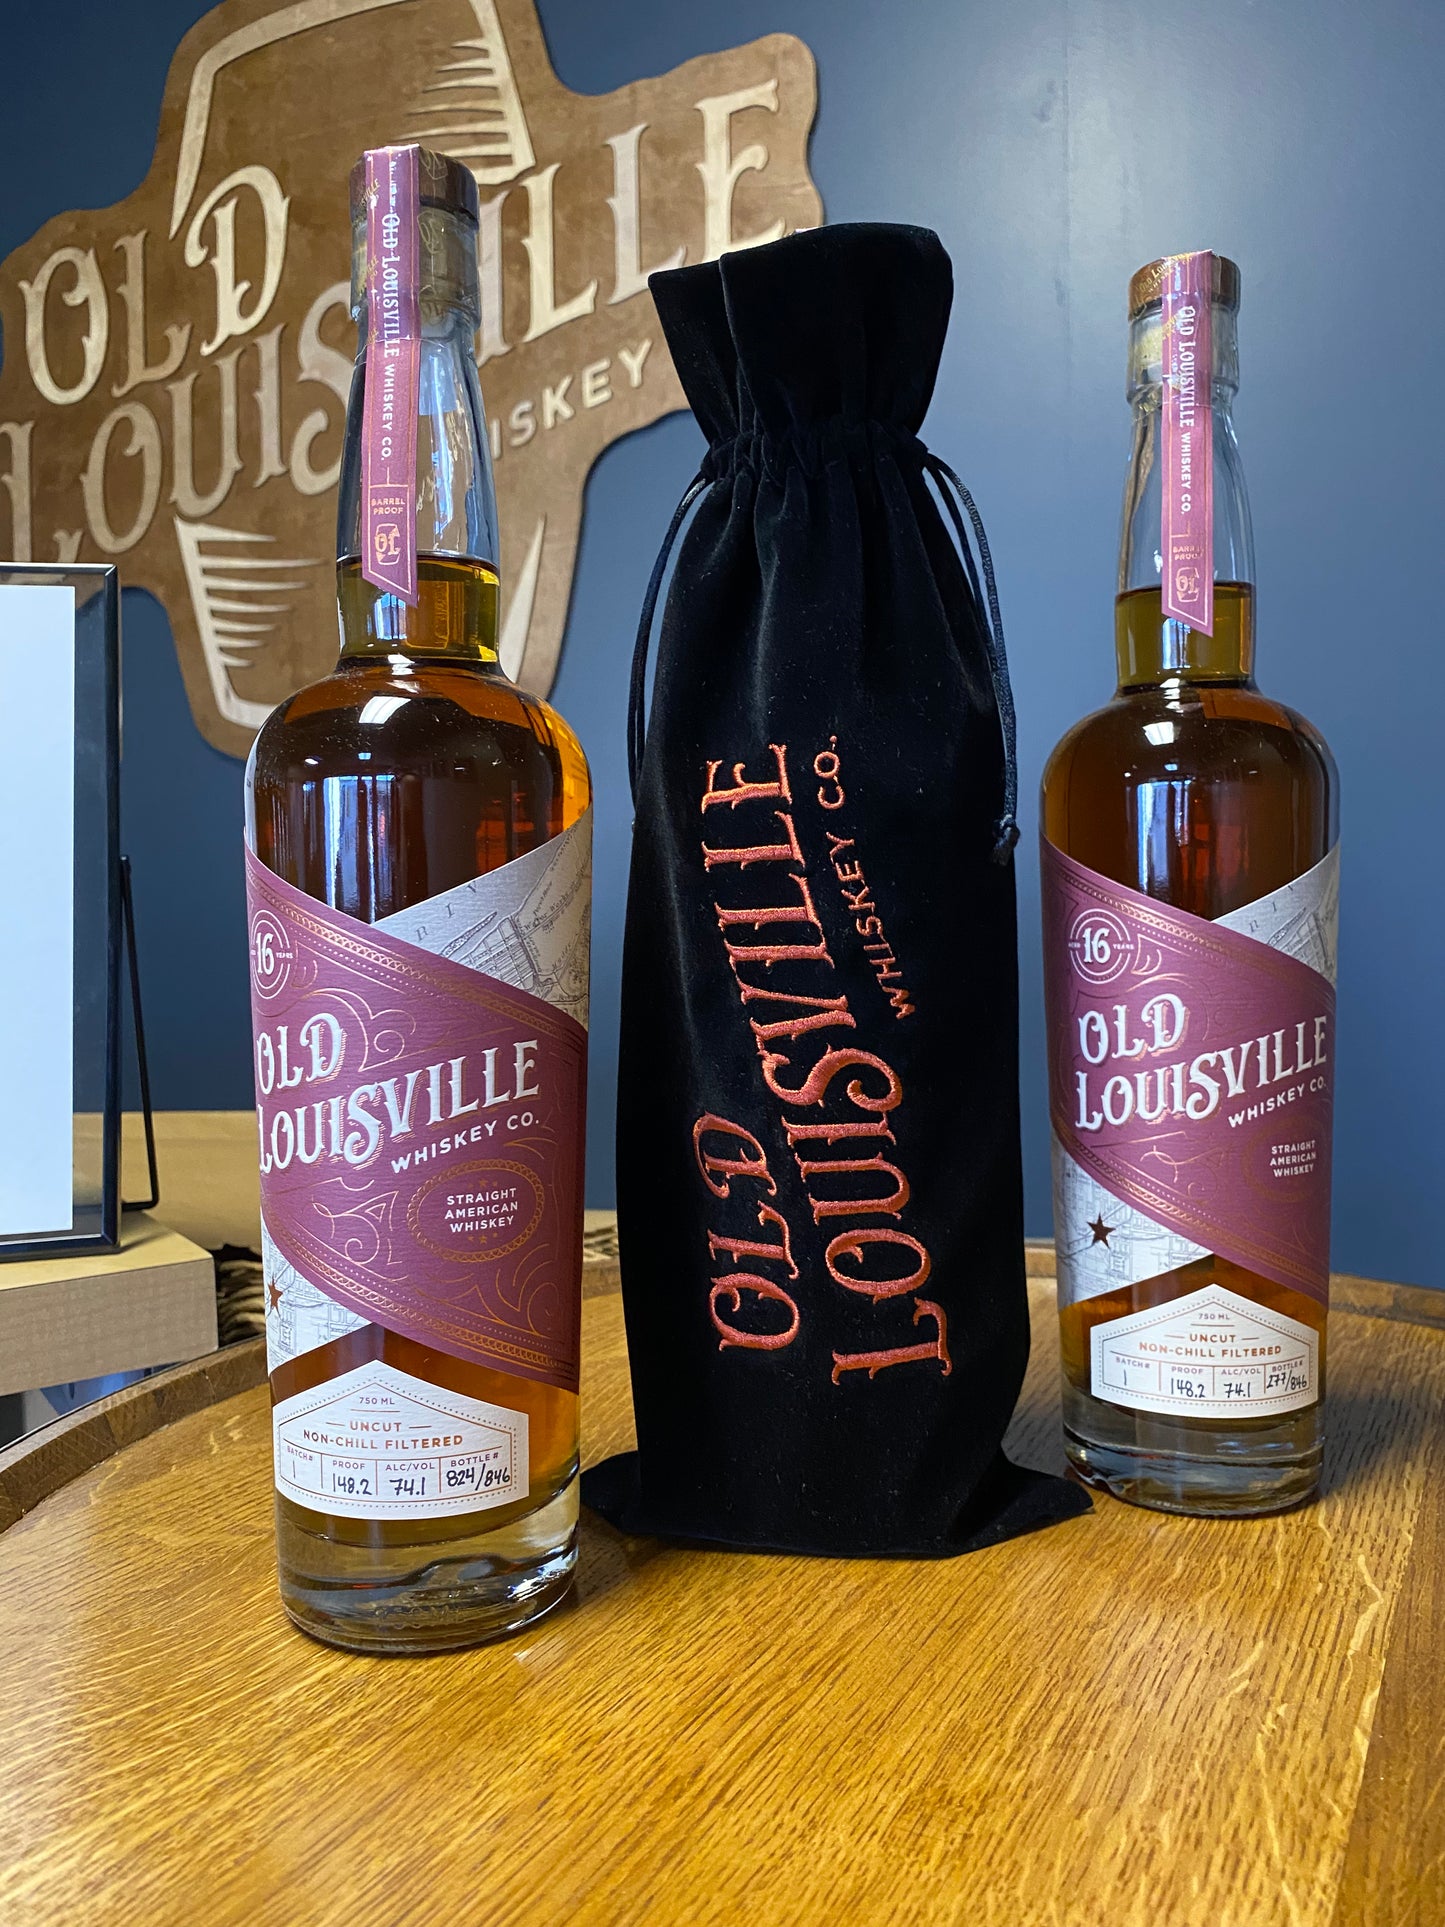 Old Louisville Whiskey Co. 16 Year Whiskey Batch #2